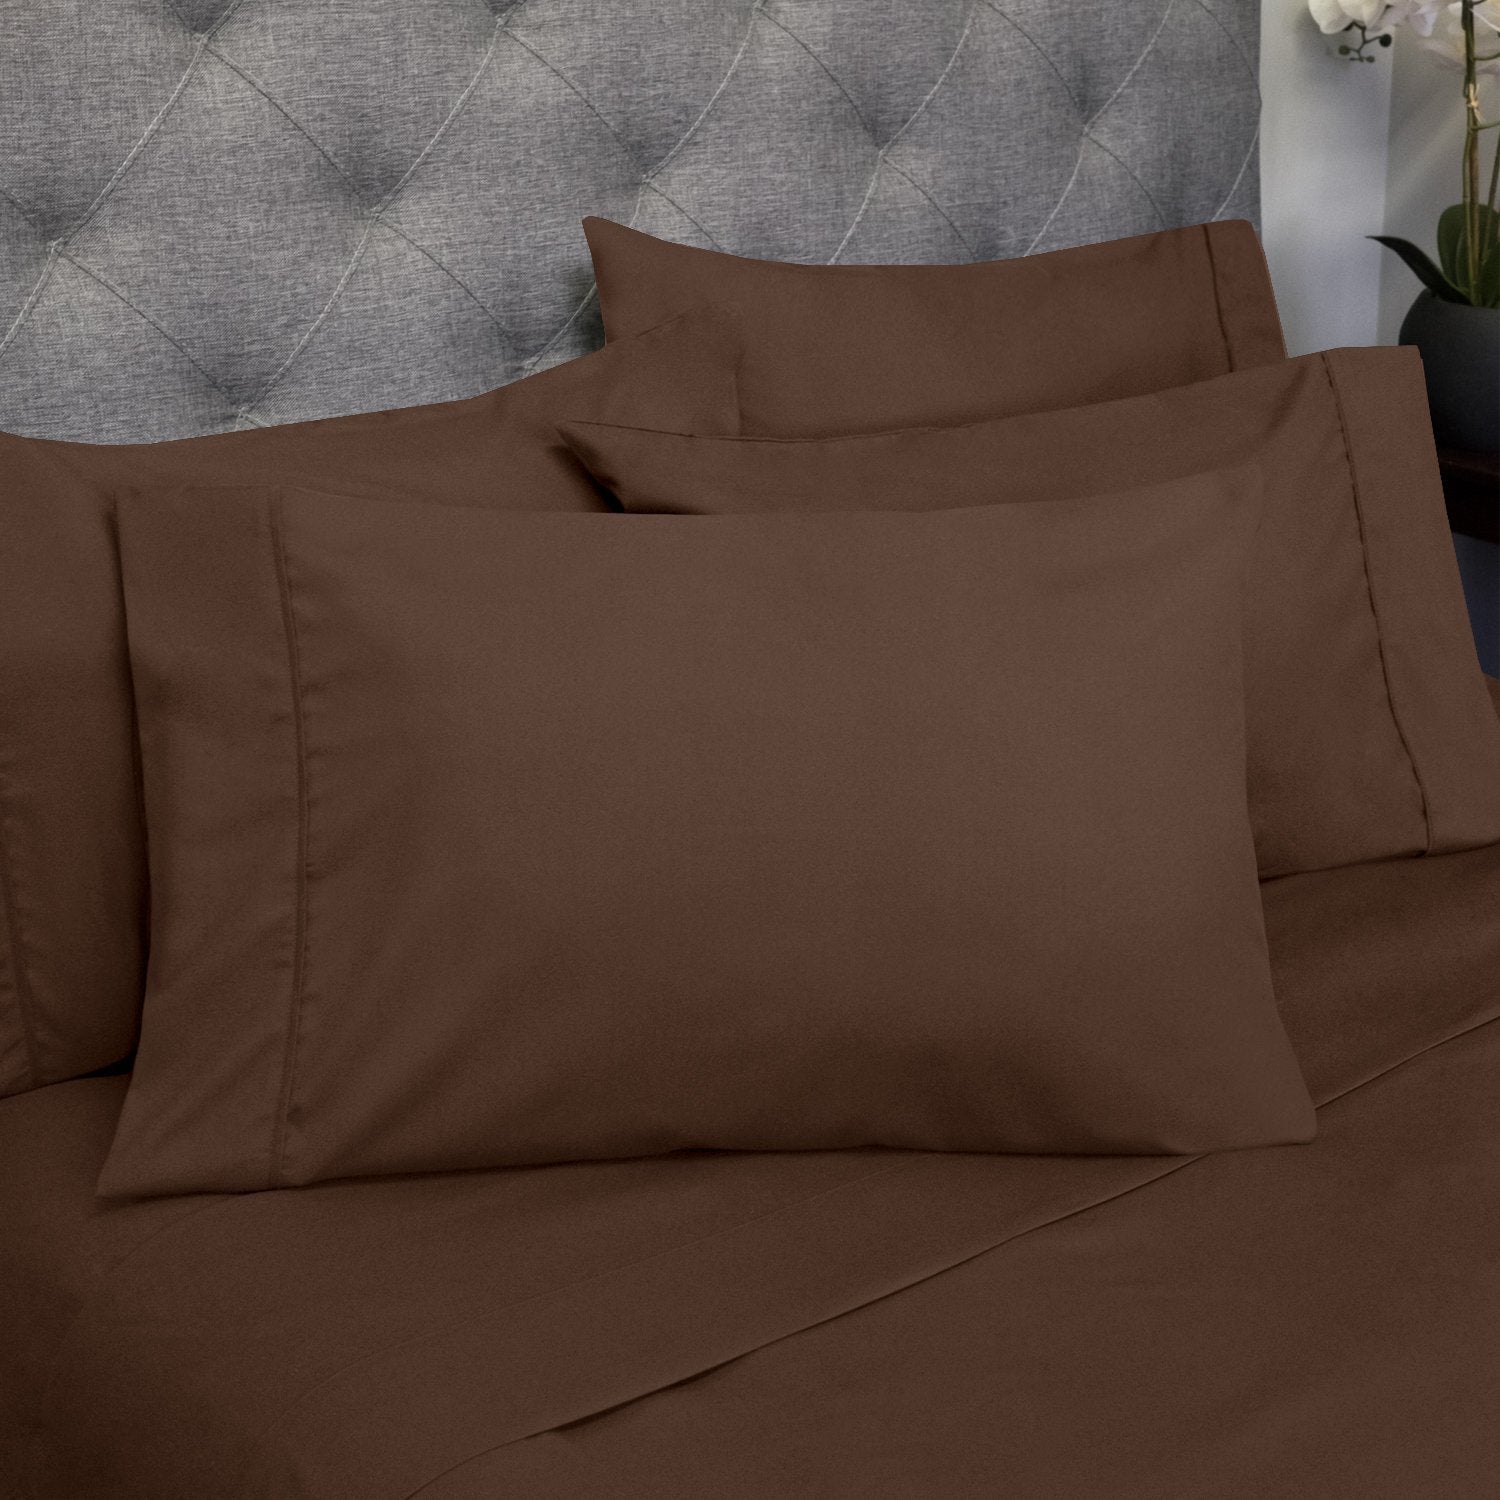 Deluxe 6-Piece Bed Sheet Set (Chocolate) - Pillowcases